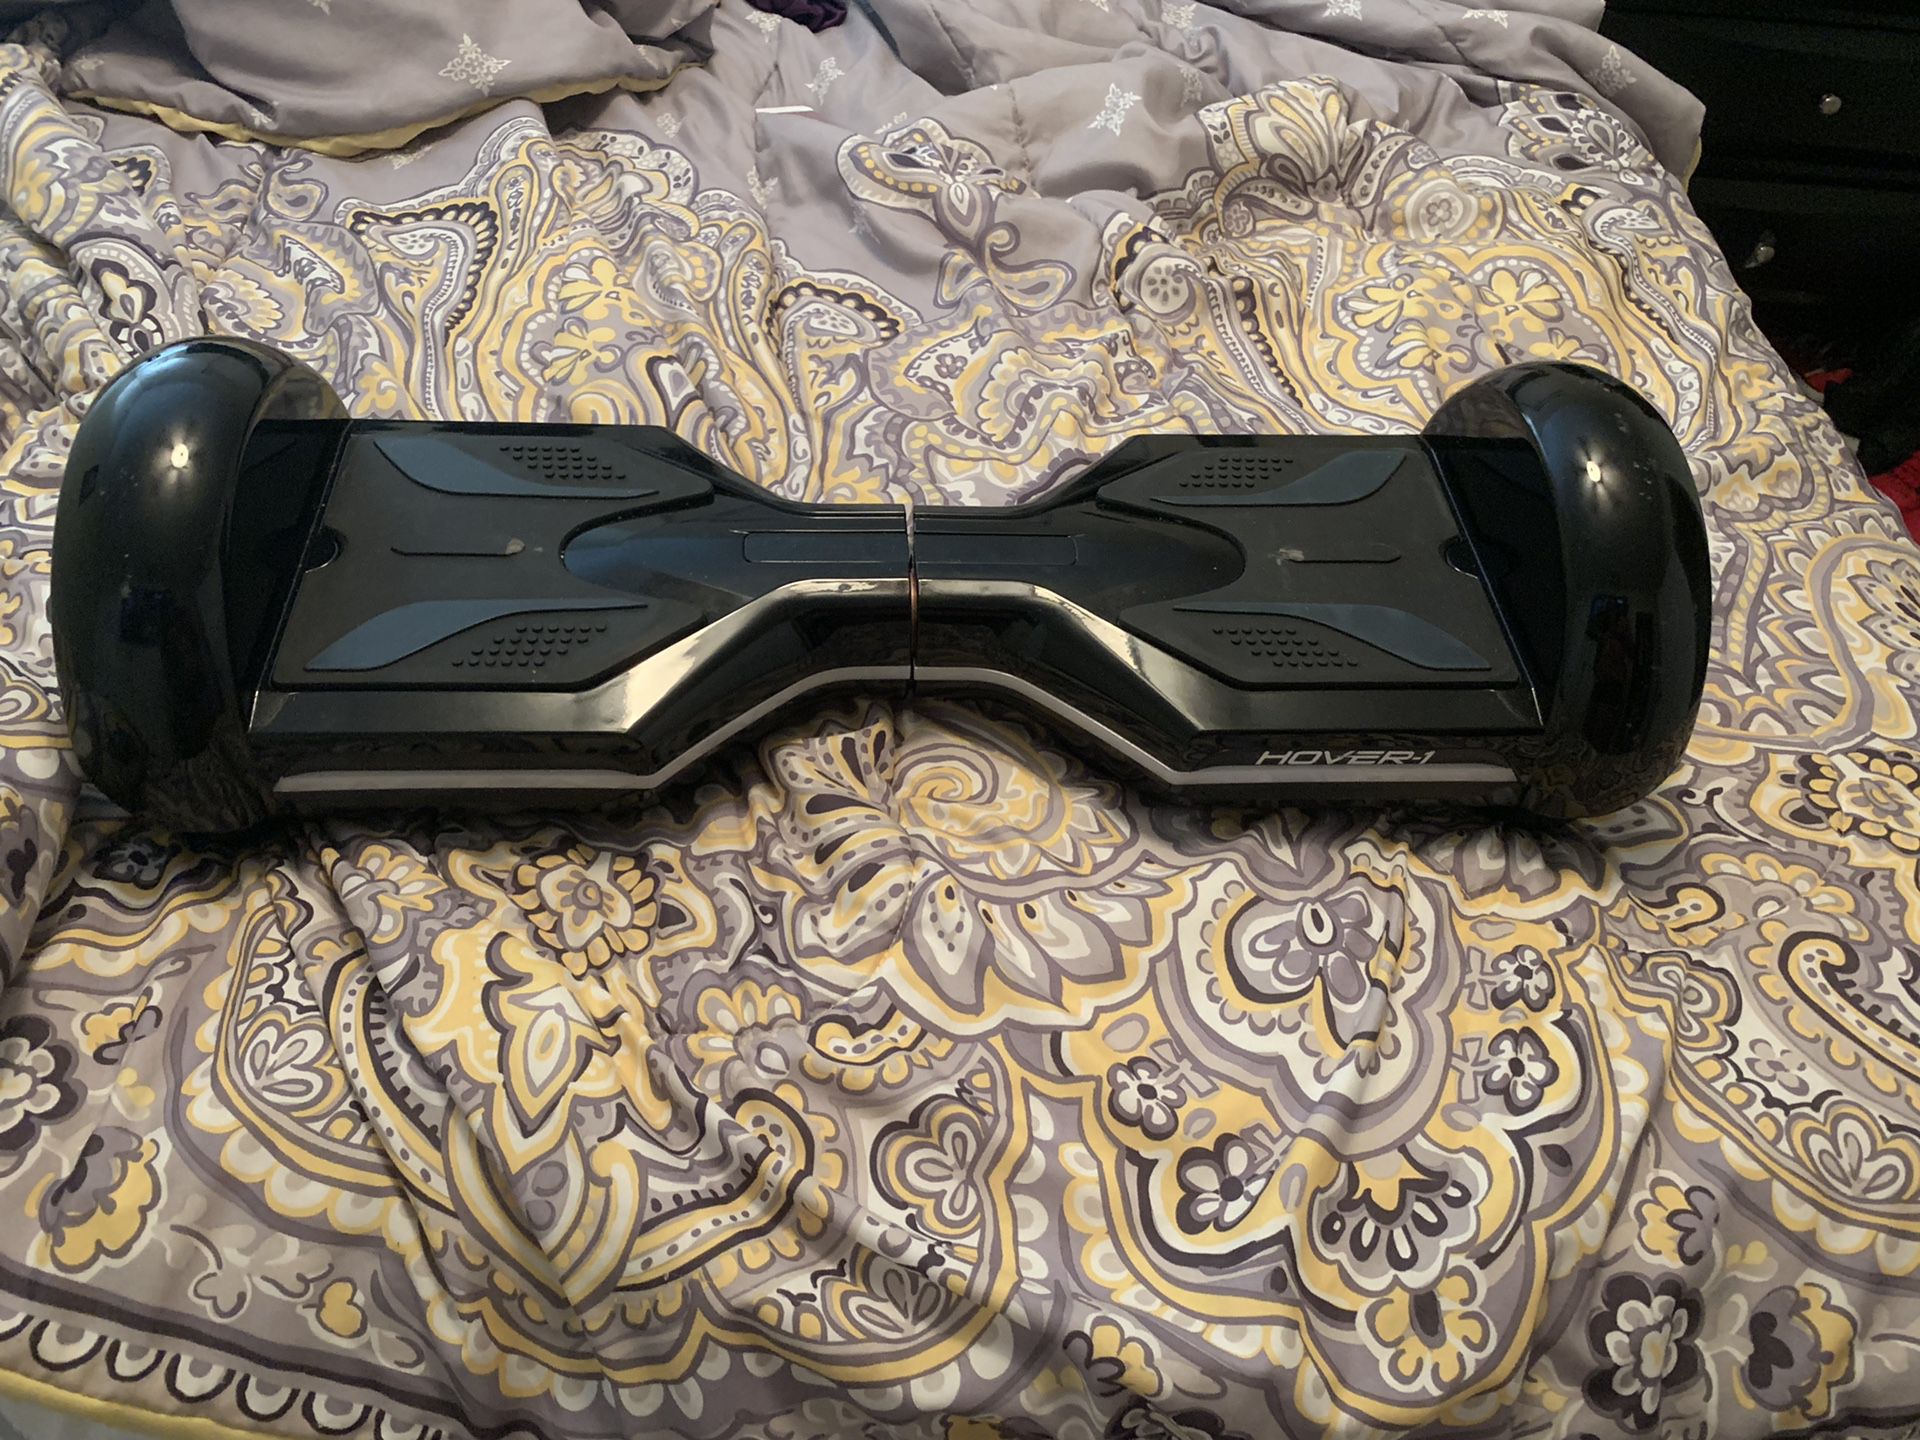 Eclipse HOVER-1 hover board barely used